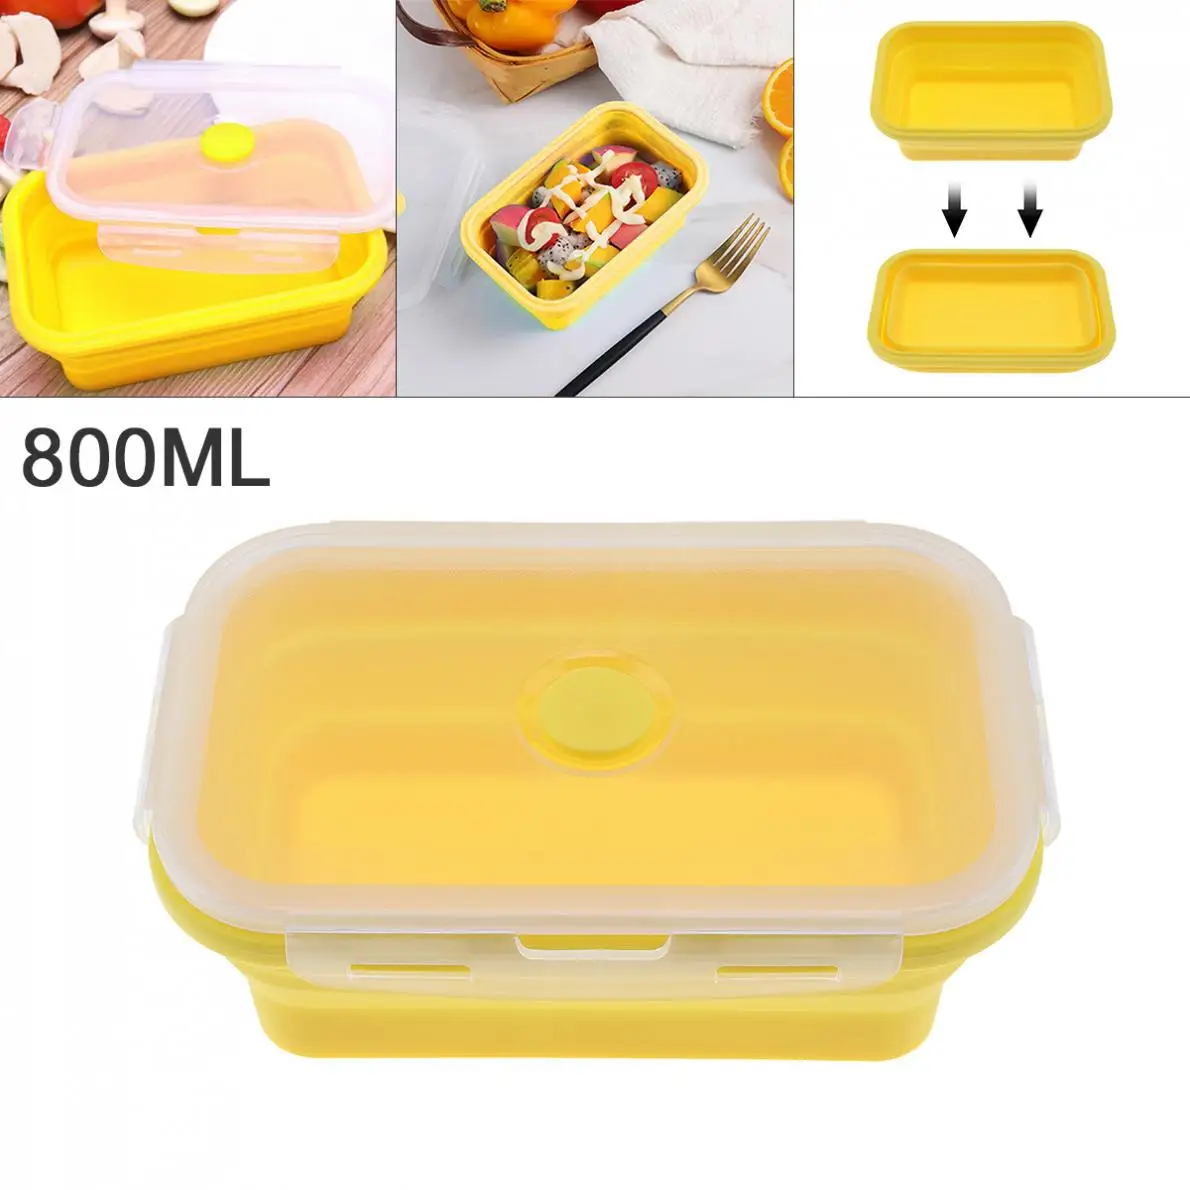 

Yellow 800ML Portable Rectangle Silicone Scalable Folding Lunchbox Bento Box with Silicone Sealing Plug for -40~230 Centigrade